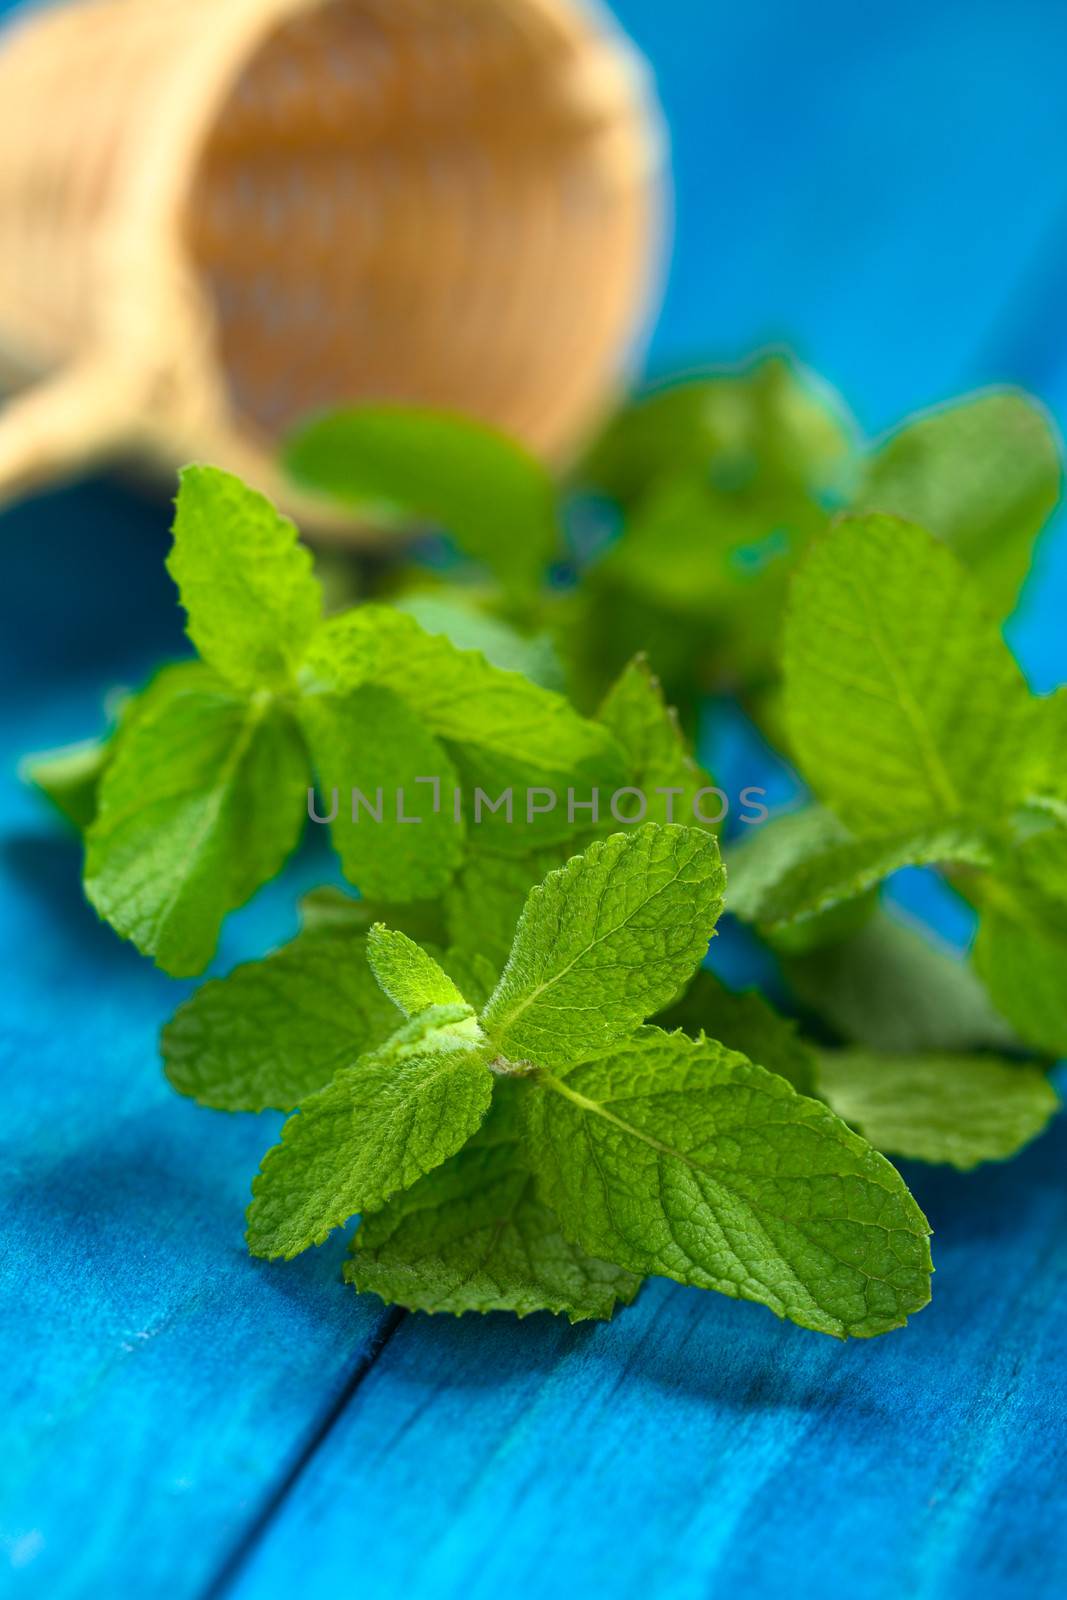 Peruvian Muña (lat. Minthostachys mollis) is a herbal and medicinal plant with a taste similar to mint, and is prepared as tea or used as a spice in some regions (Selective Focus, Focus on some of the leaves in the front)